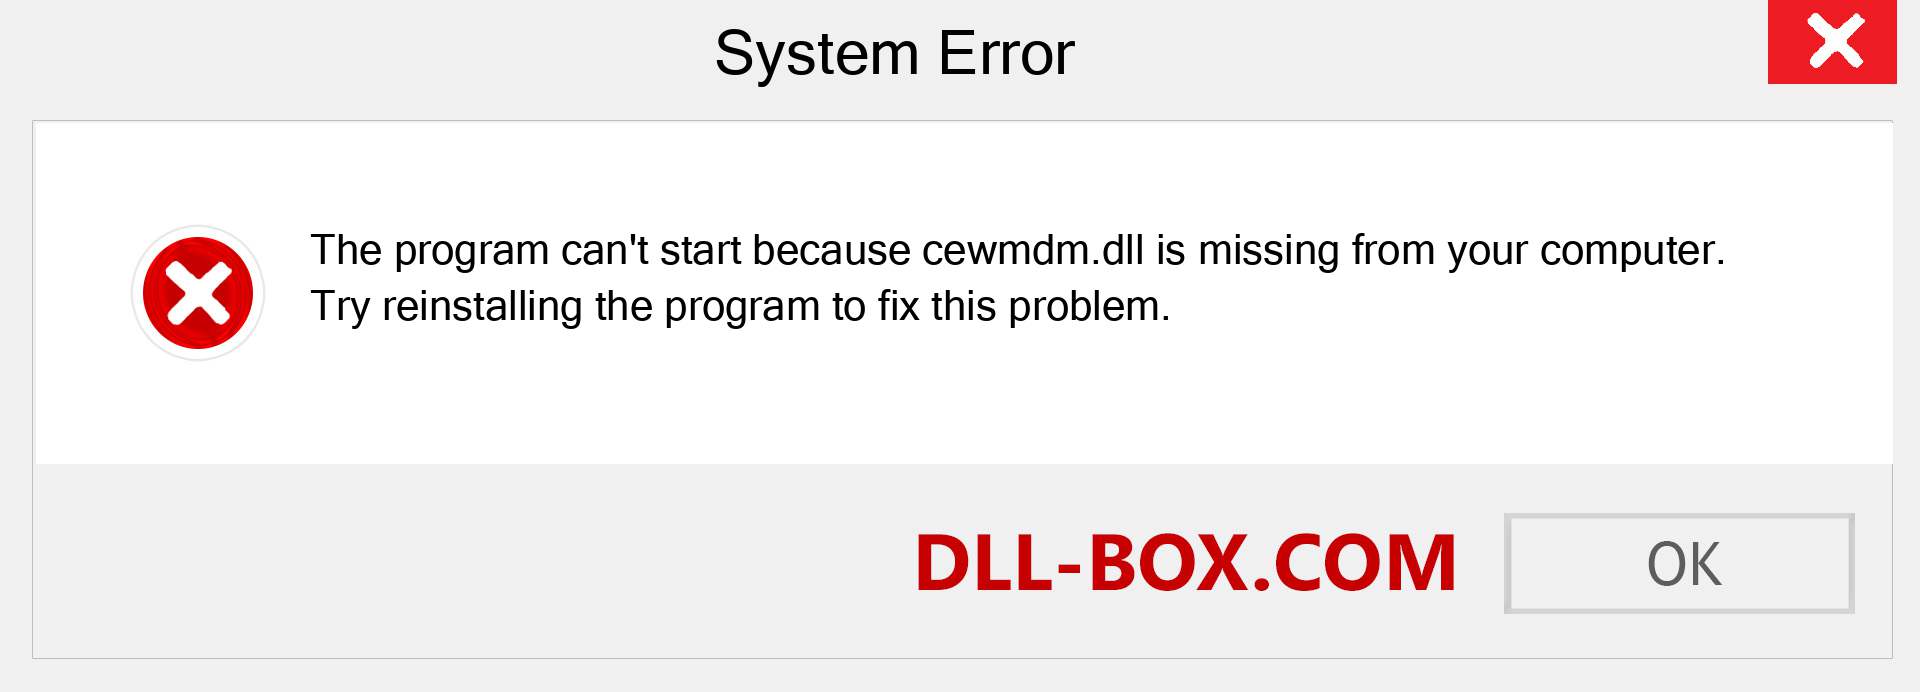  cewmdm.dll file is missing?. Download for Windows 7, 8, 10 - Fix  cewmdm dll Missing Error on Windows, photos, images